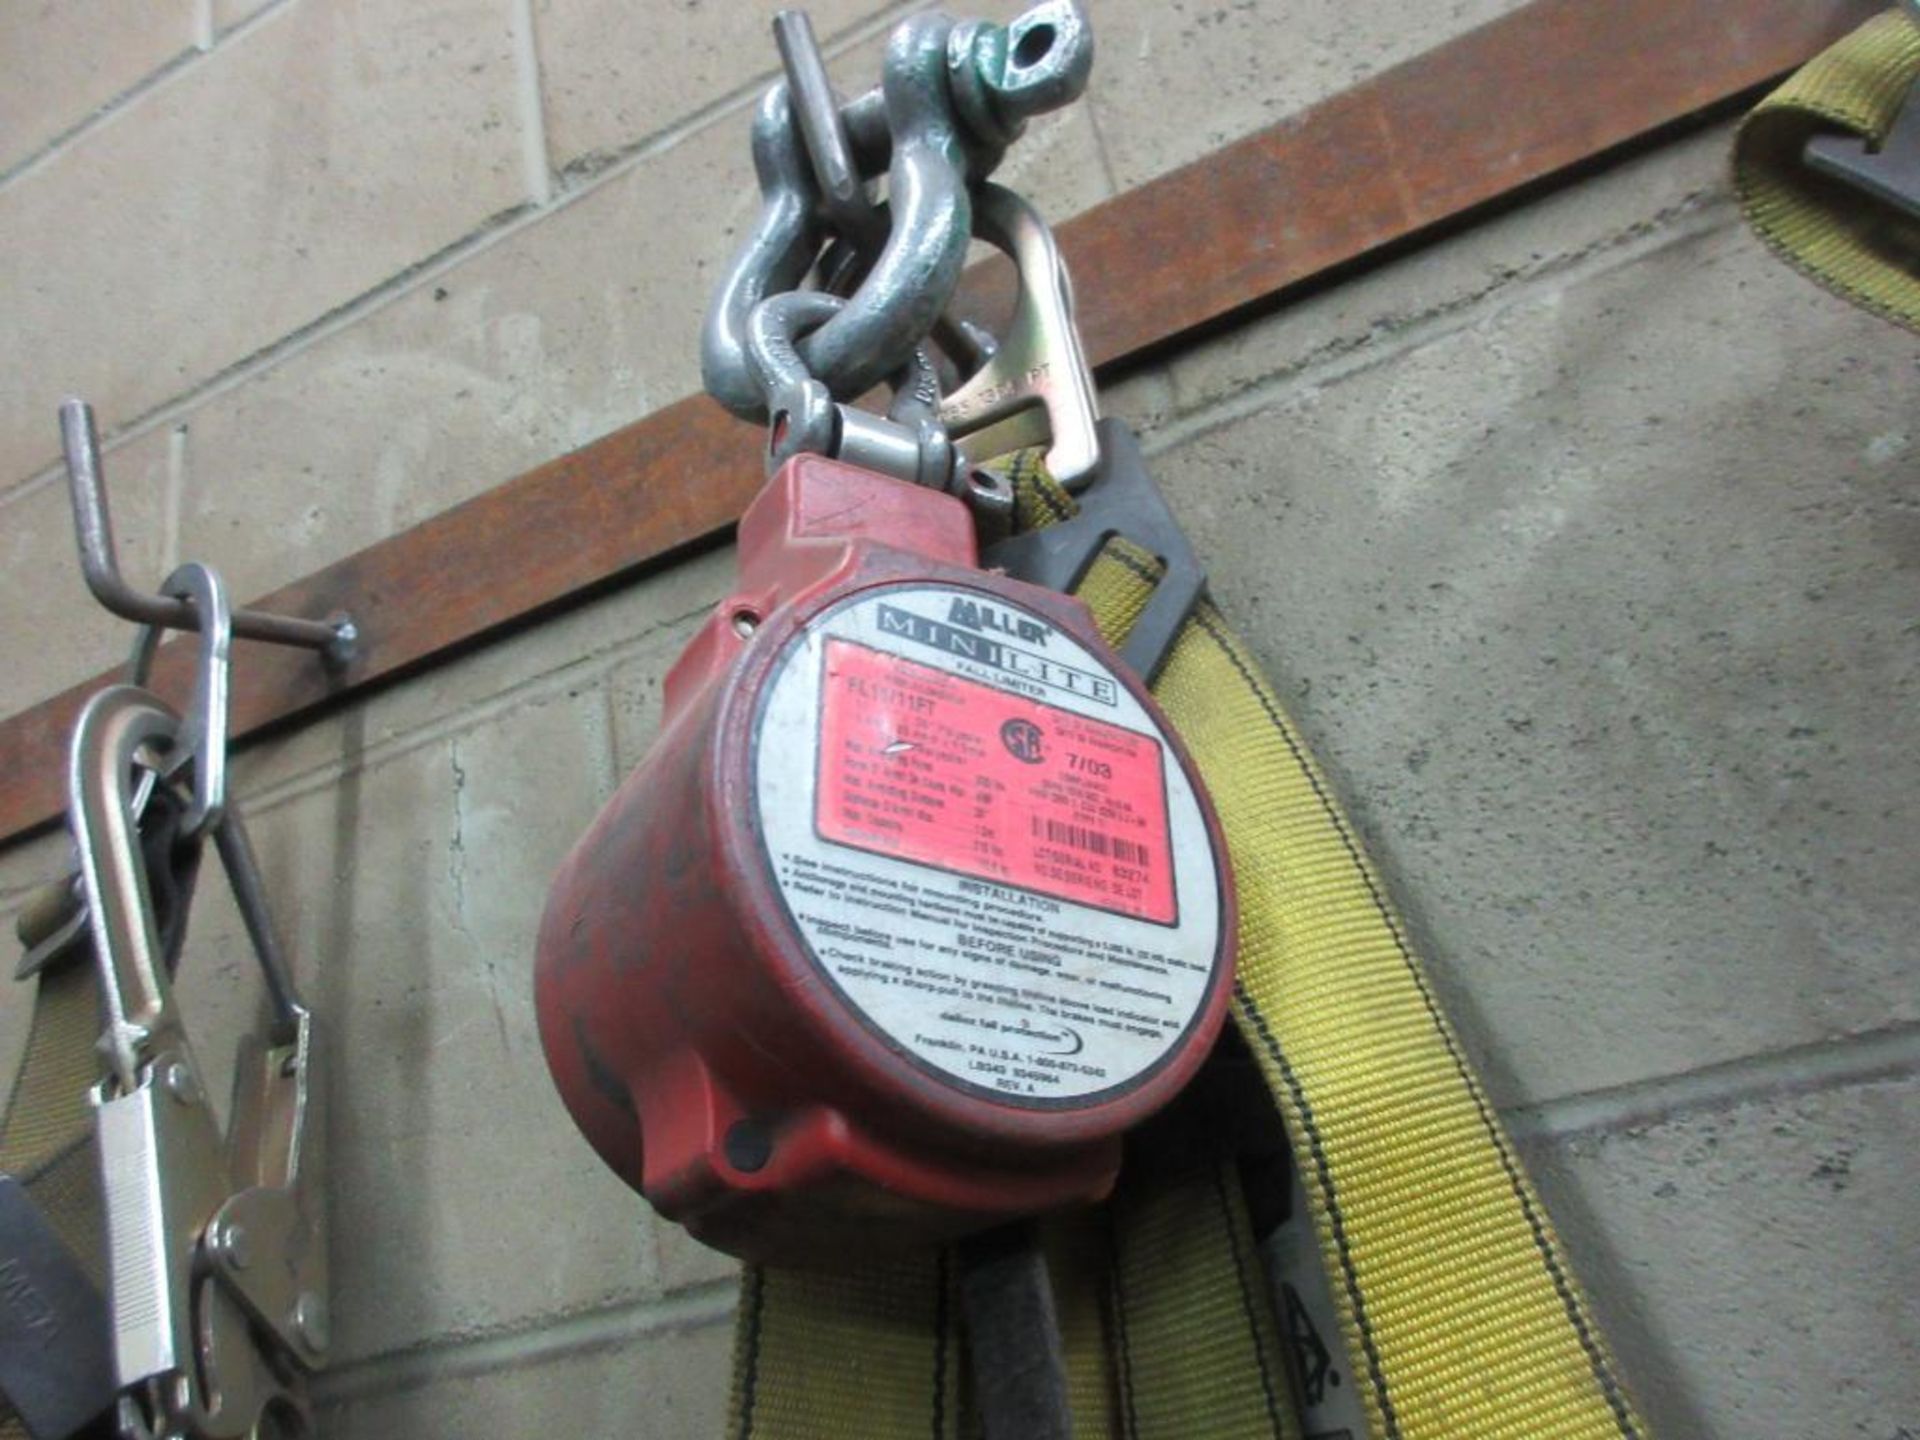 LOT OF HARNESSES WITH MILLER MINILITE FALL LIMITER (WEST TOOL ROOM) - Image 2 of 3